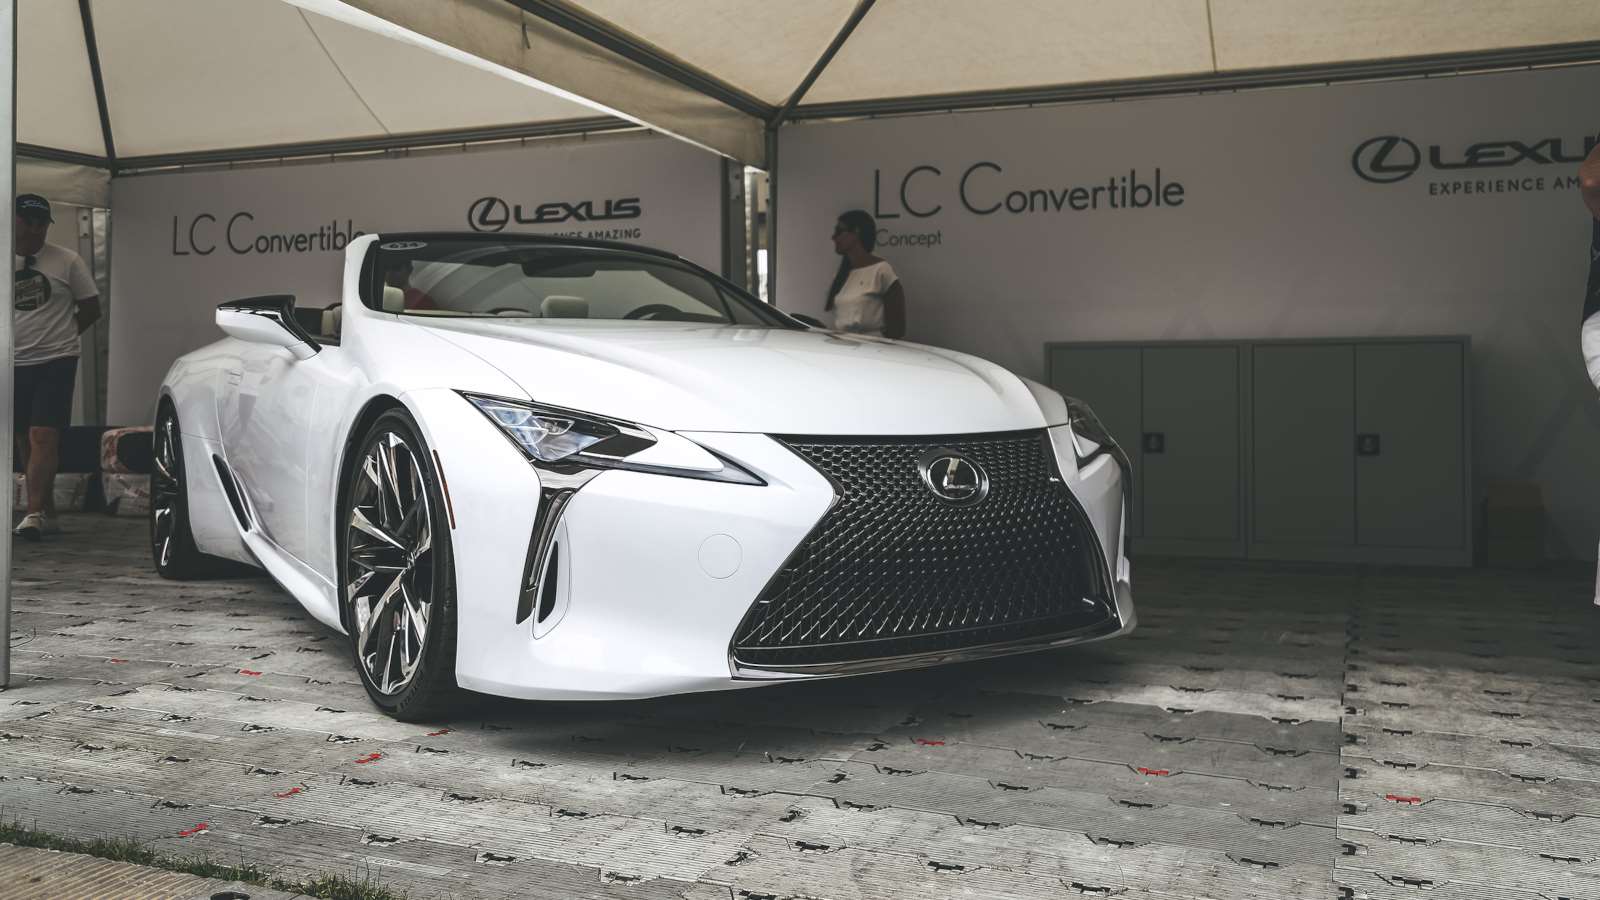 World Debut for the Lexus LC Convertible